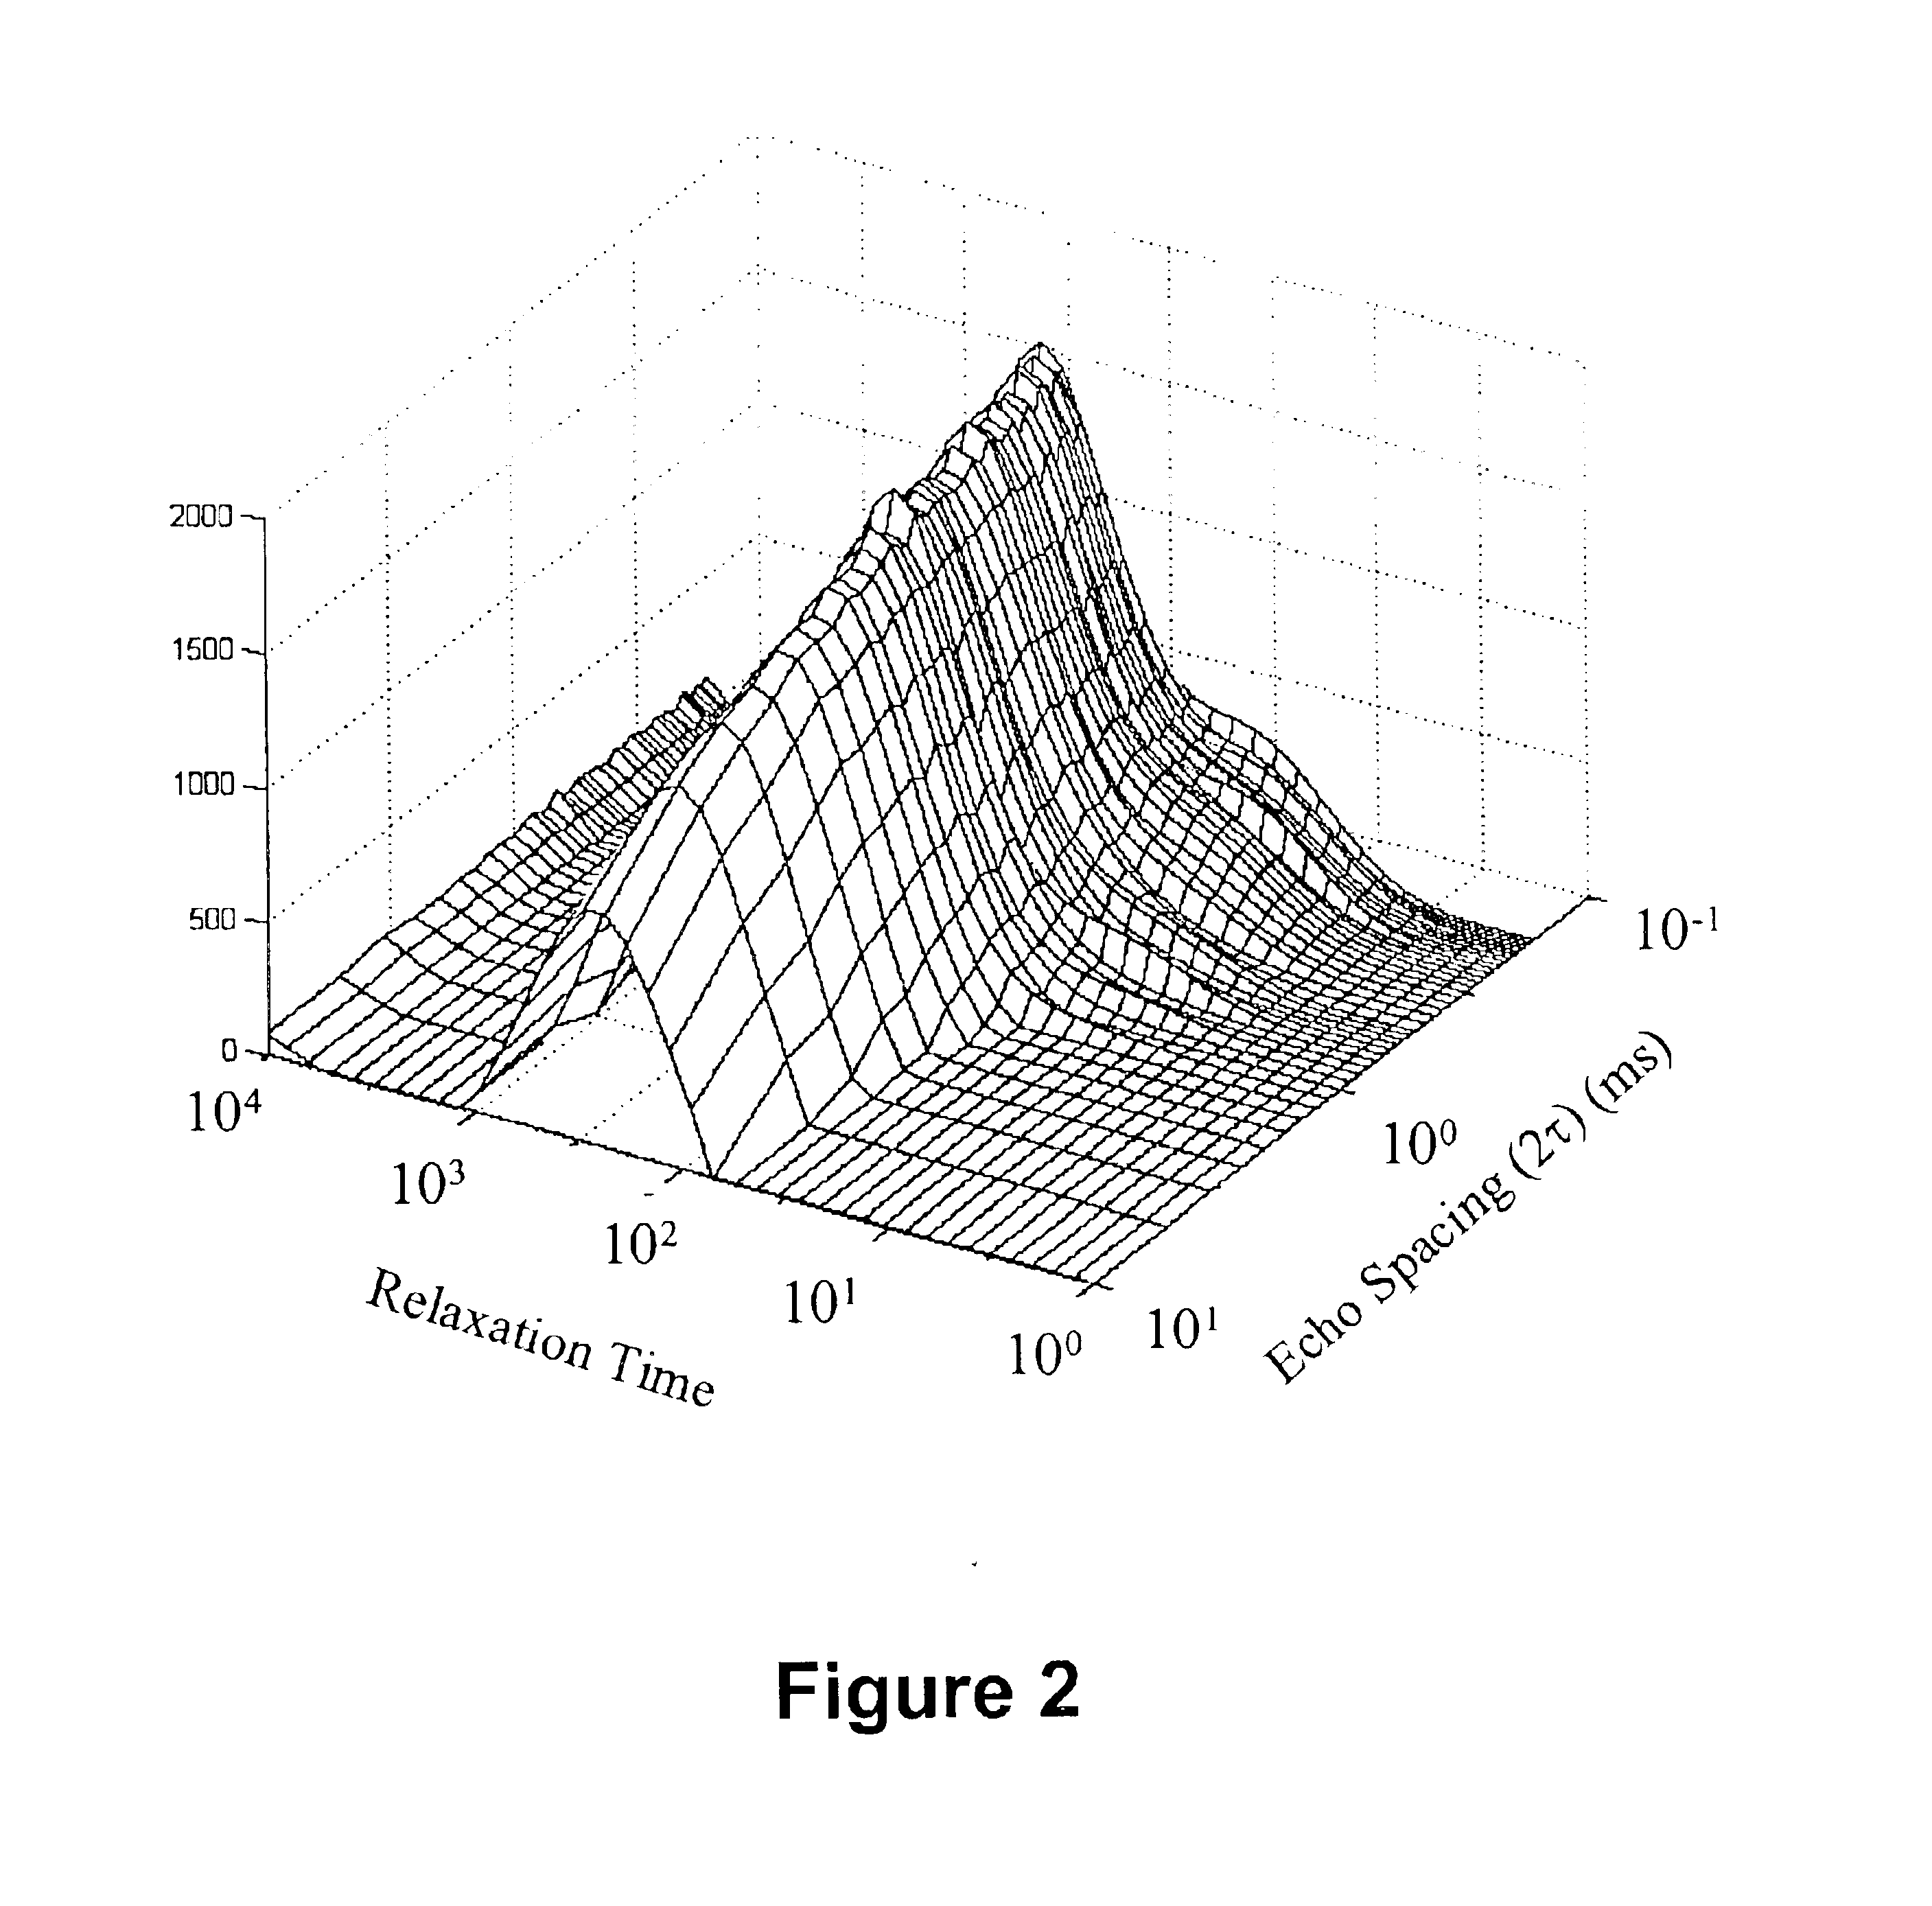 Methods of decoupling diffusion effects from relaxation times to determine properties of porous media containing fluids